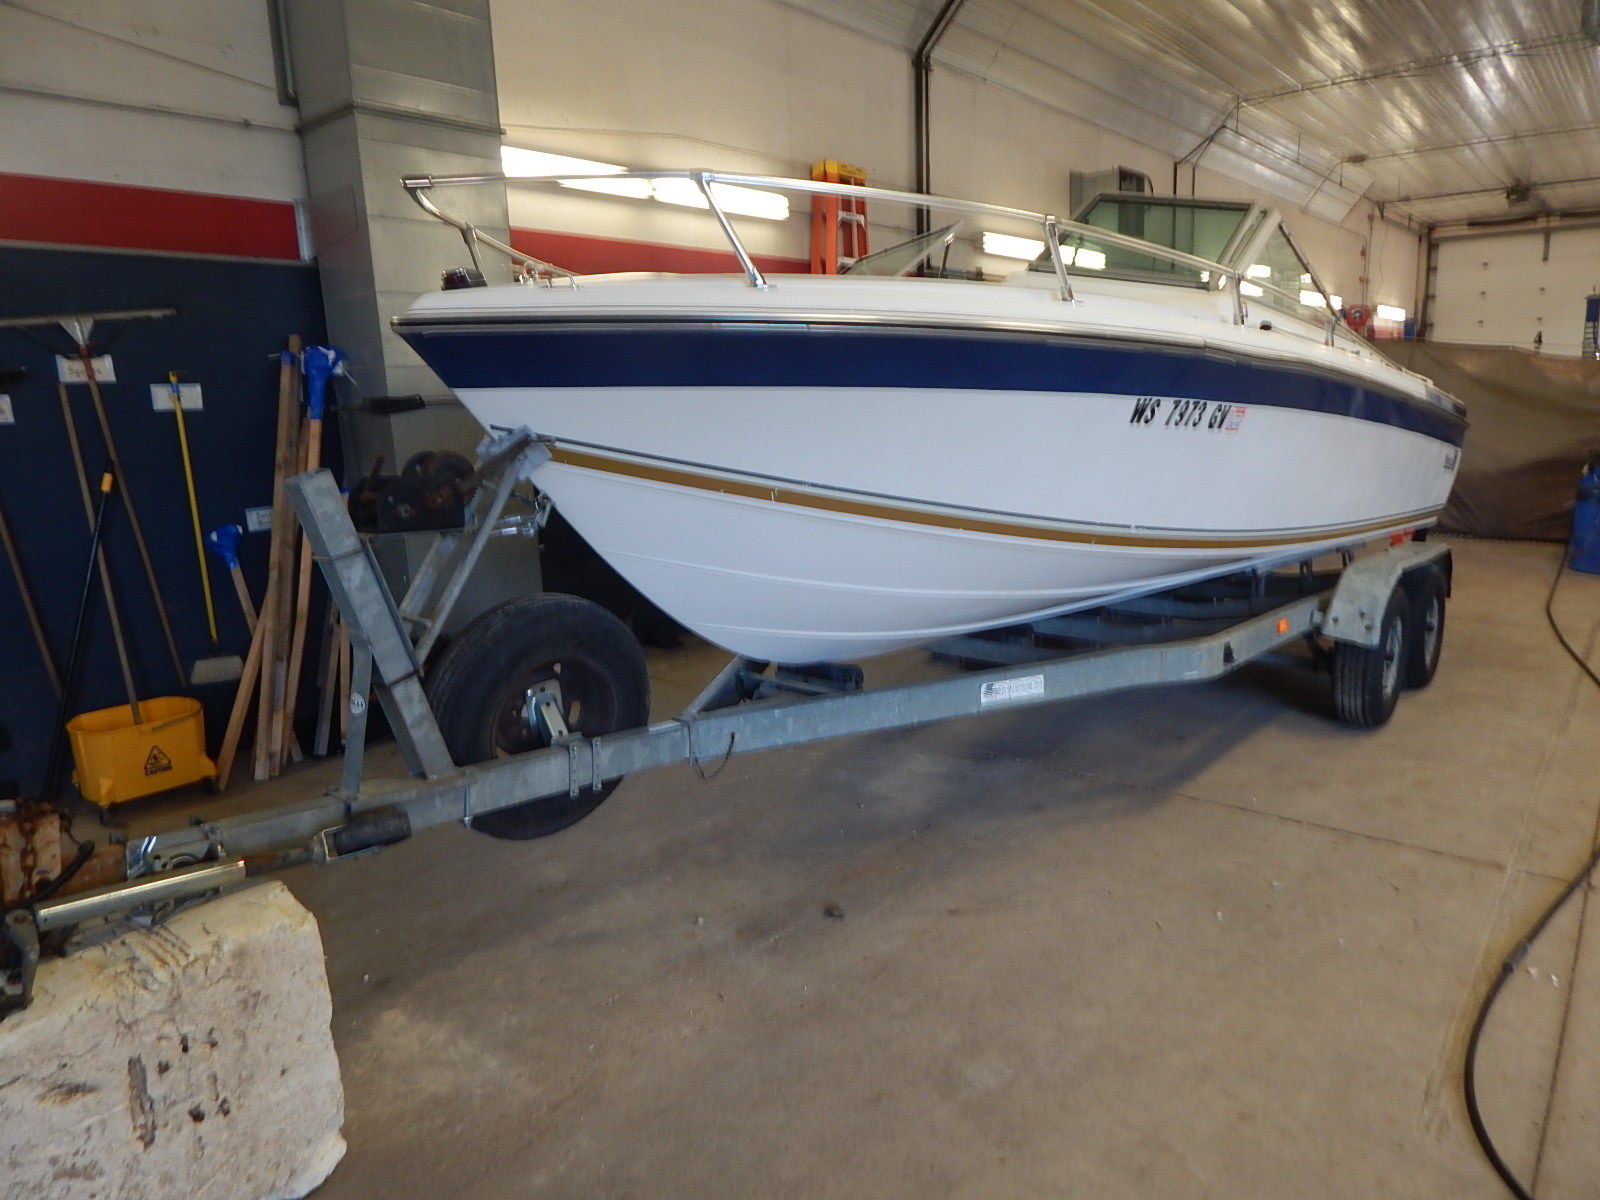 Wellcraft Bowrider 196 1981 for sale for $696 - Boats-from-USA.com